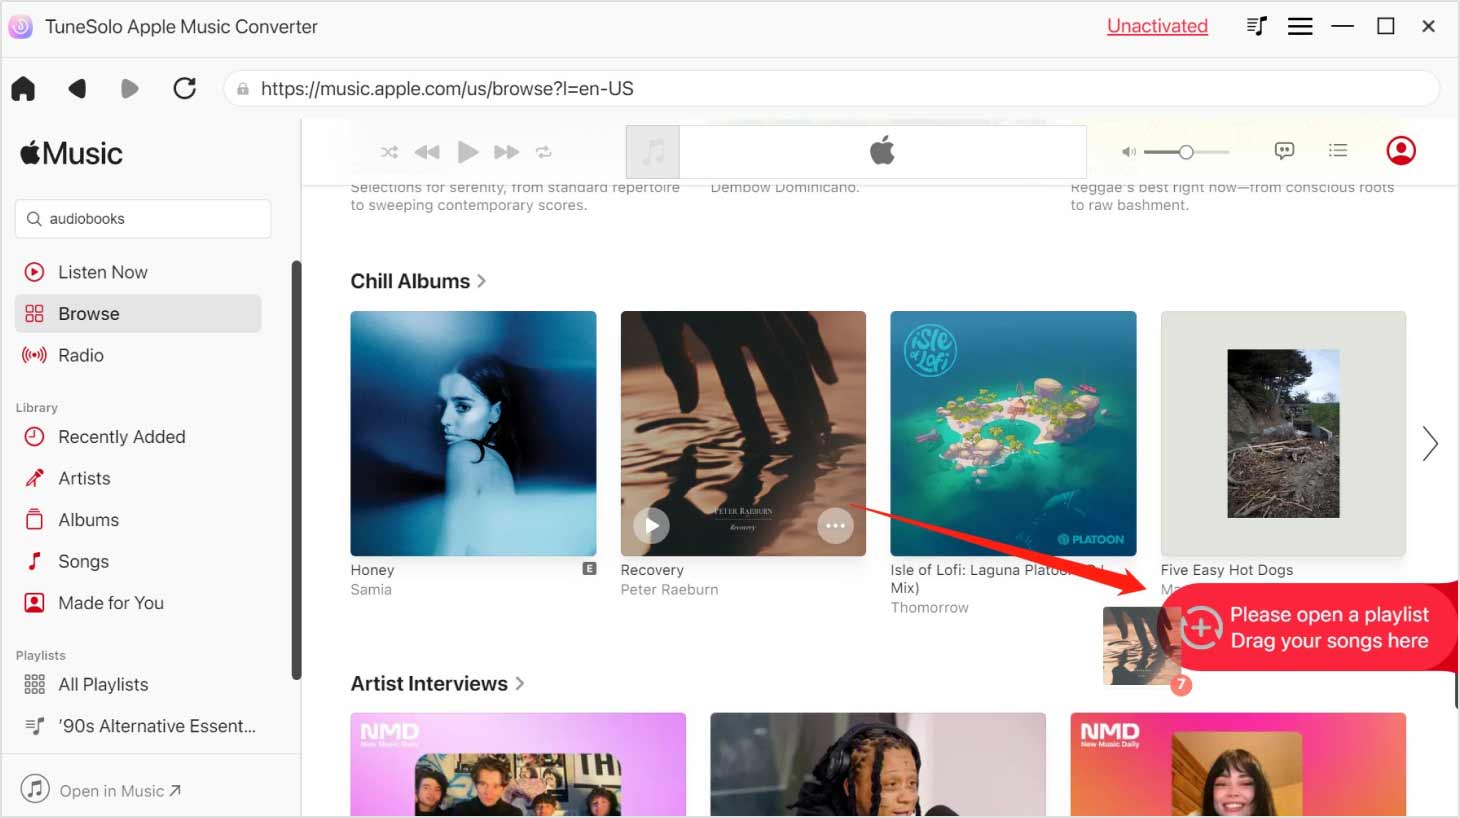 Download Music from Apple Music for Free Safely